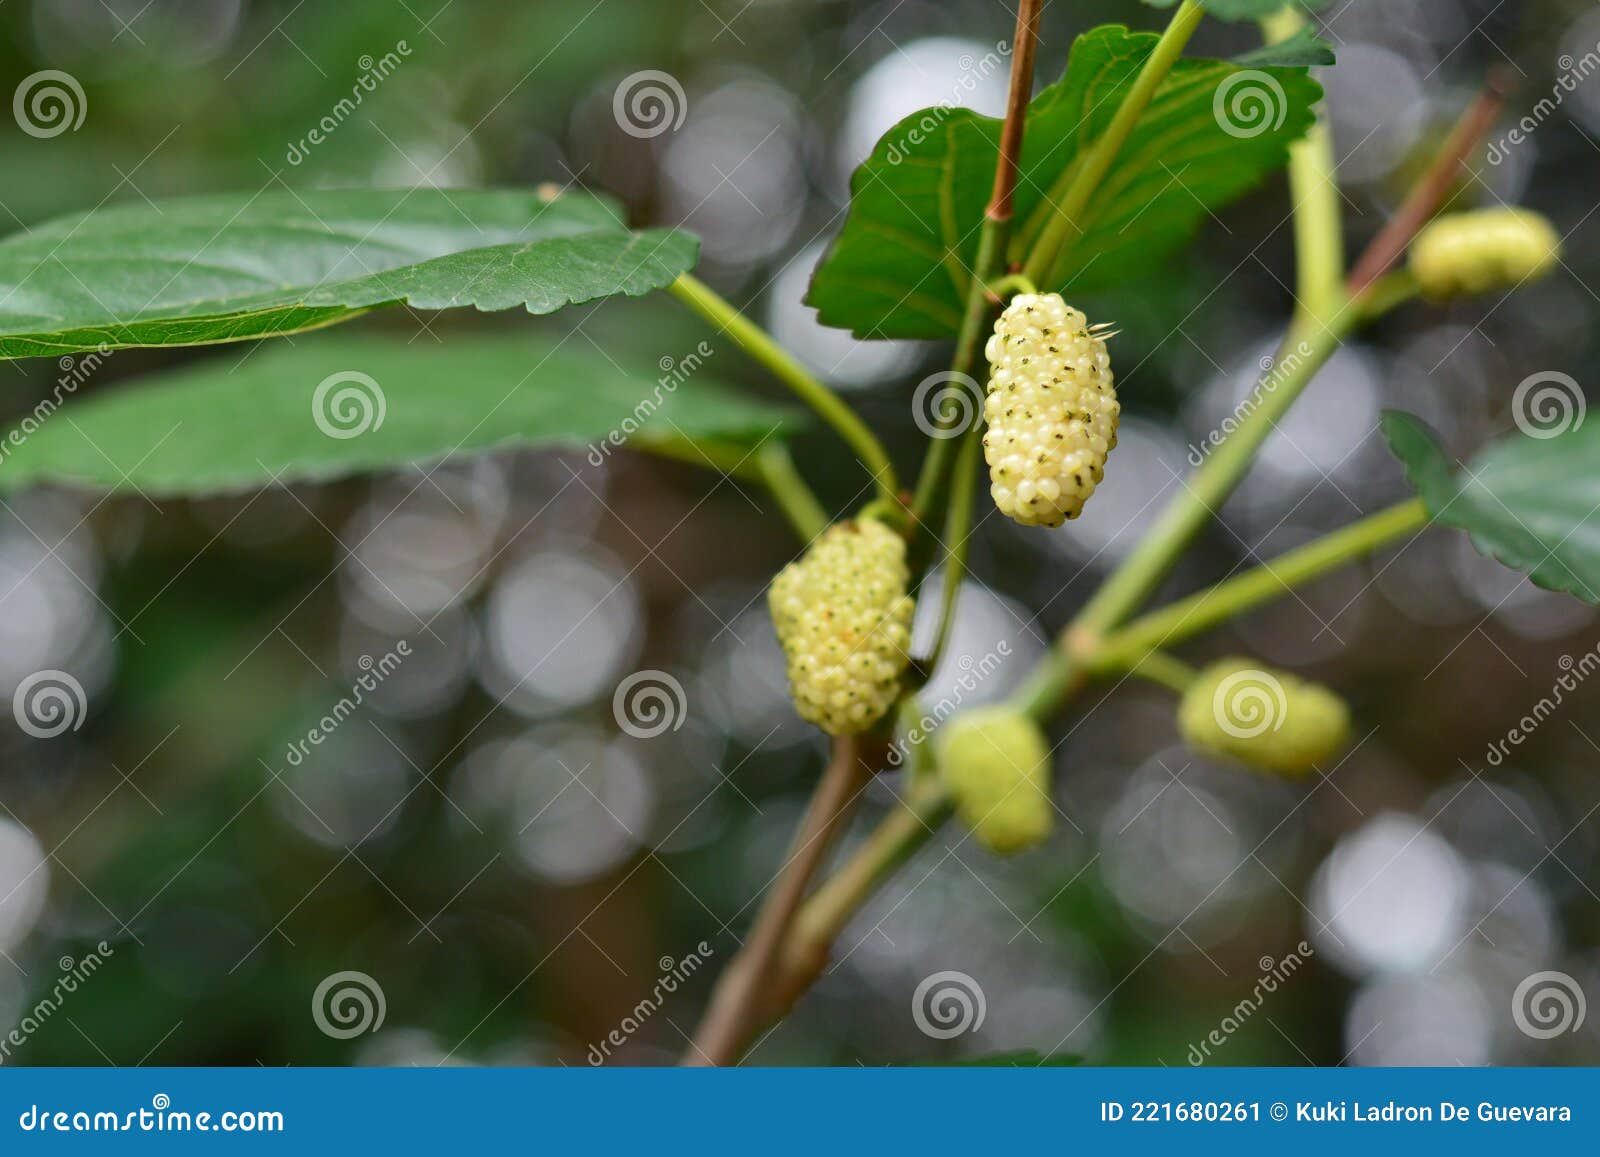 white blackberries on the branches of a mulberry tree